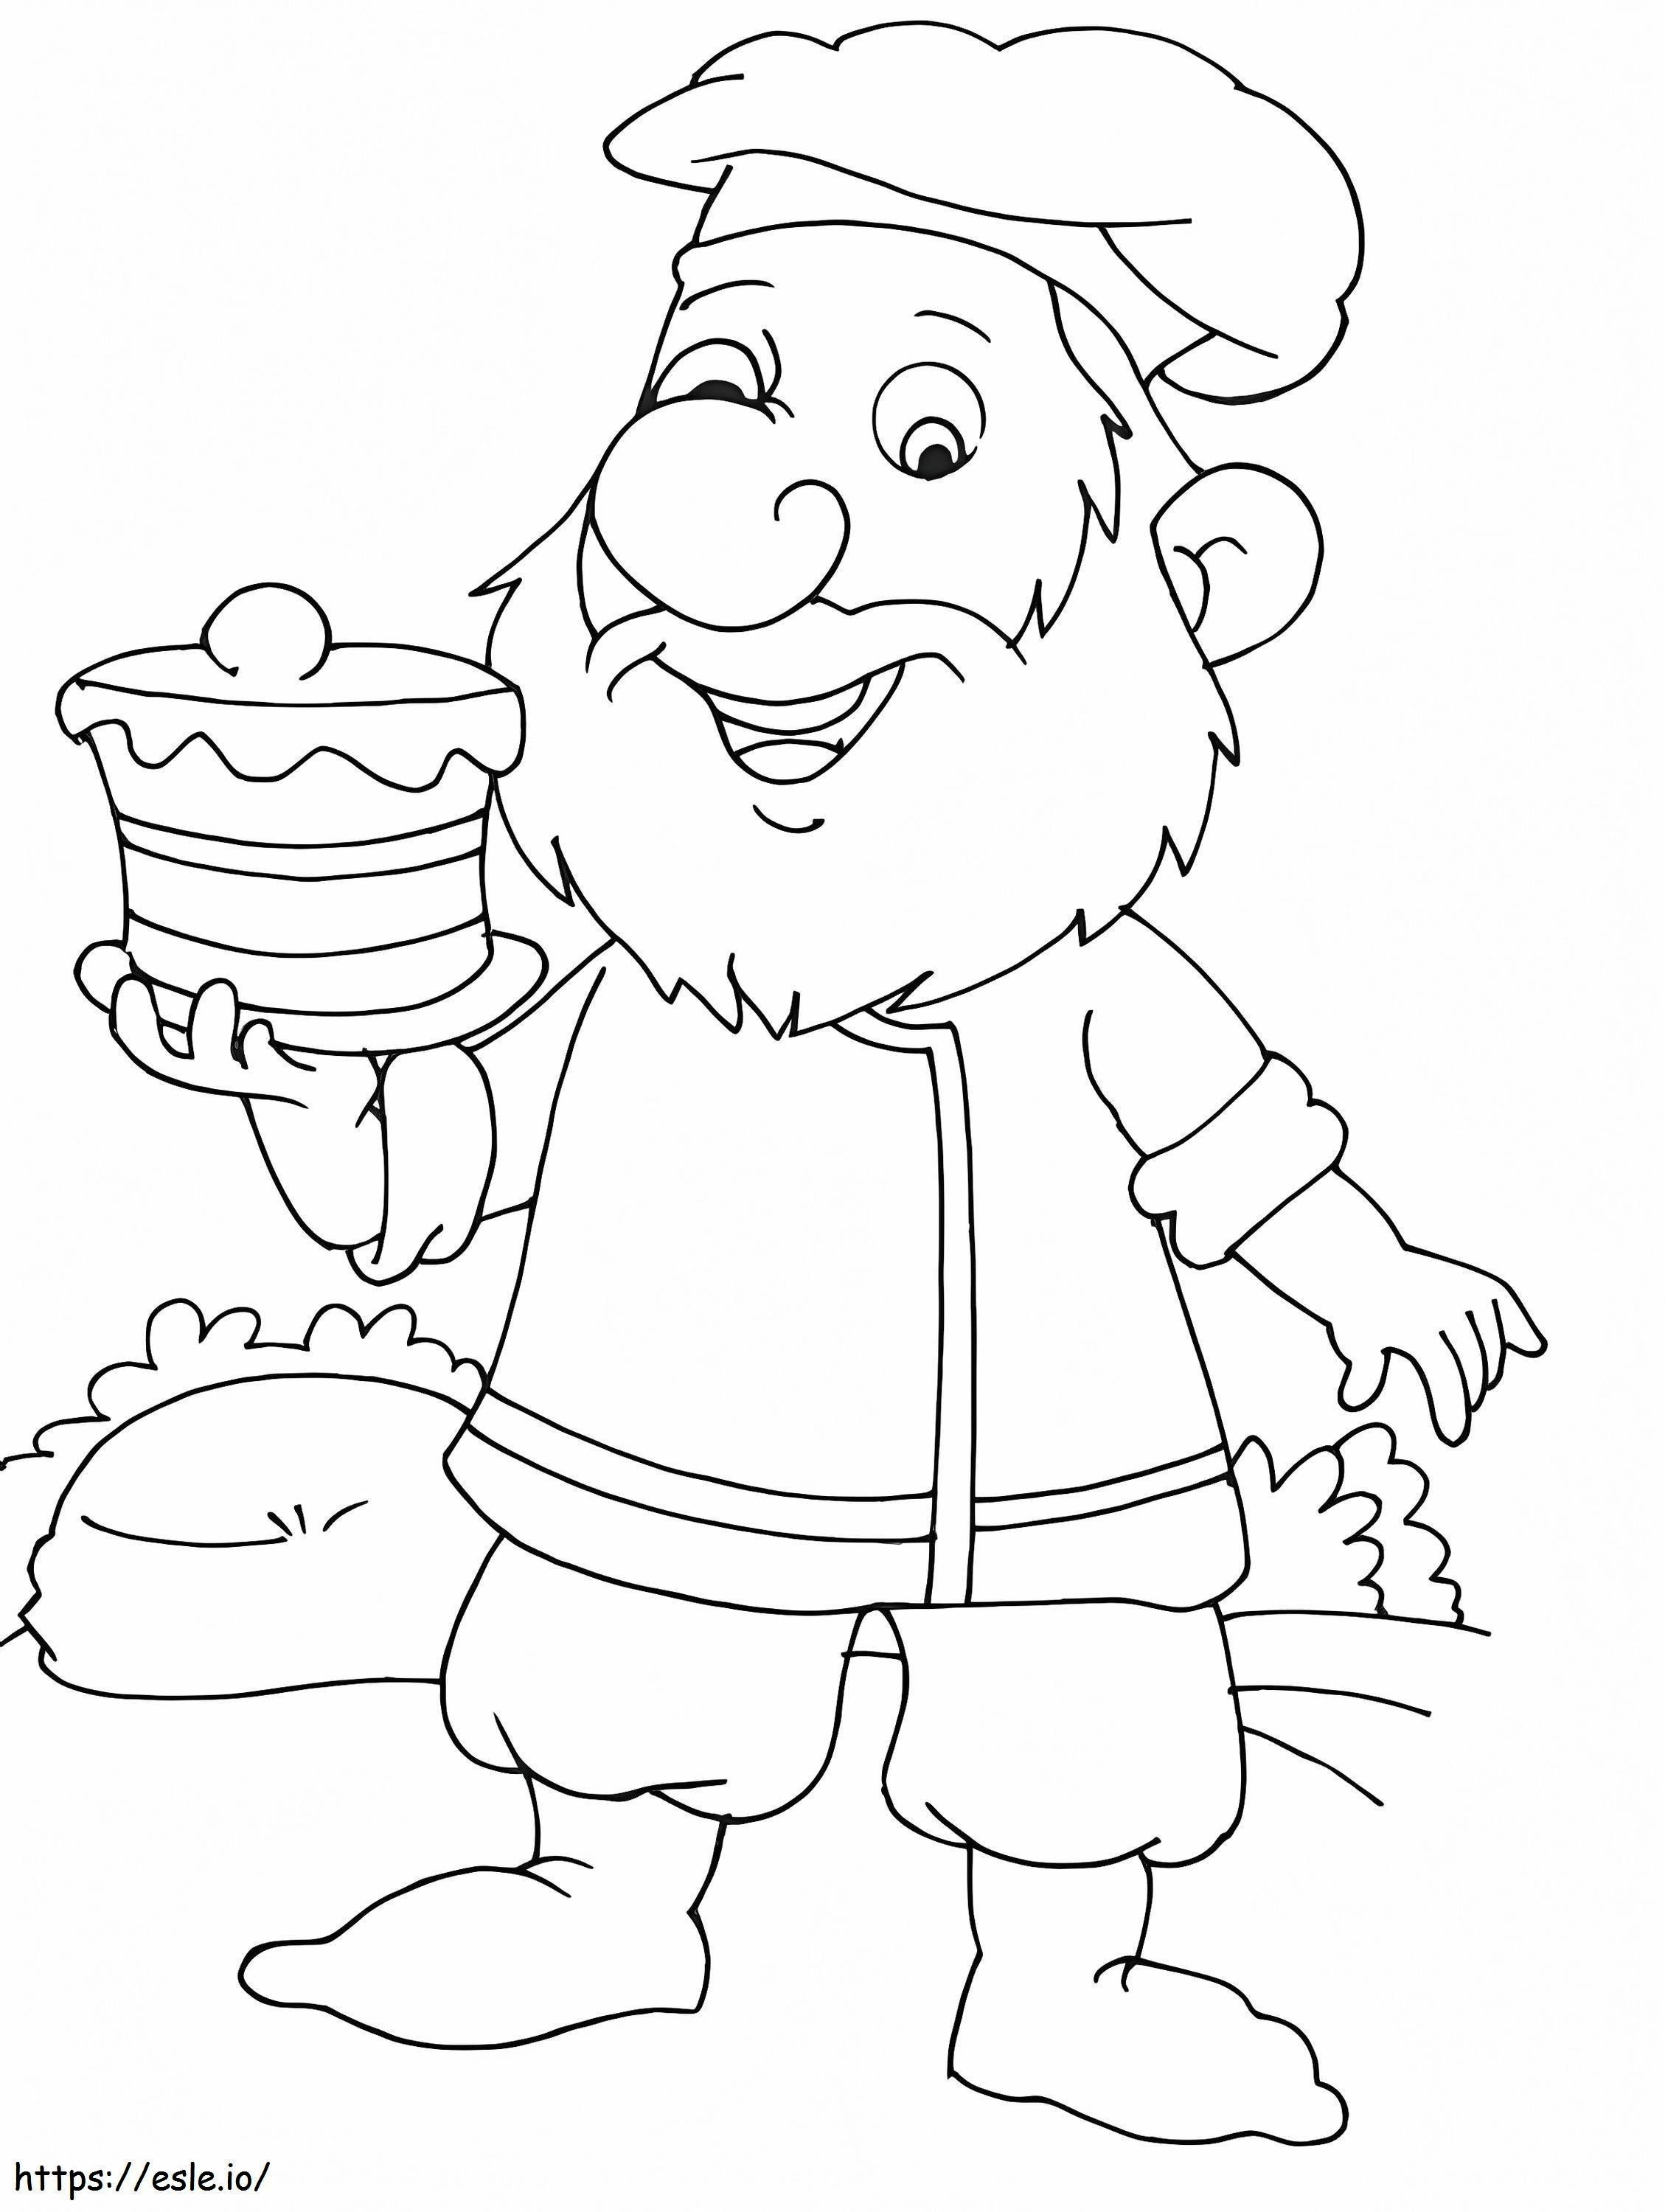 Dwarf With Birthday Cake coloring page